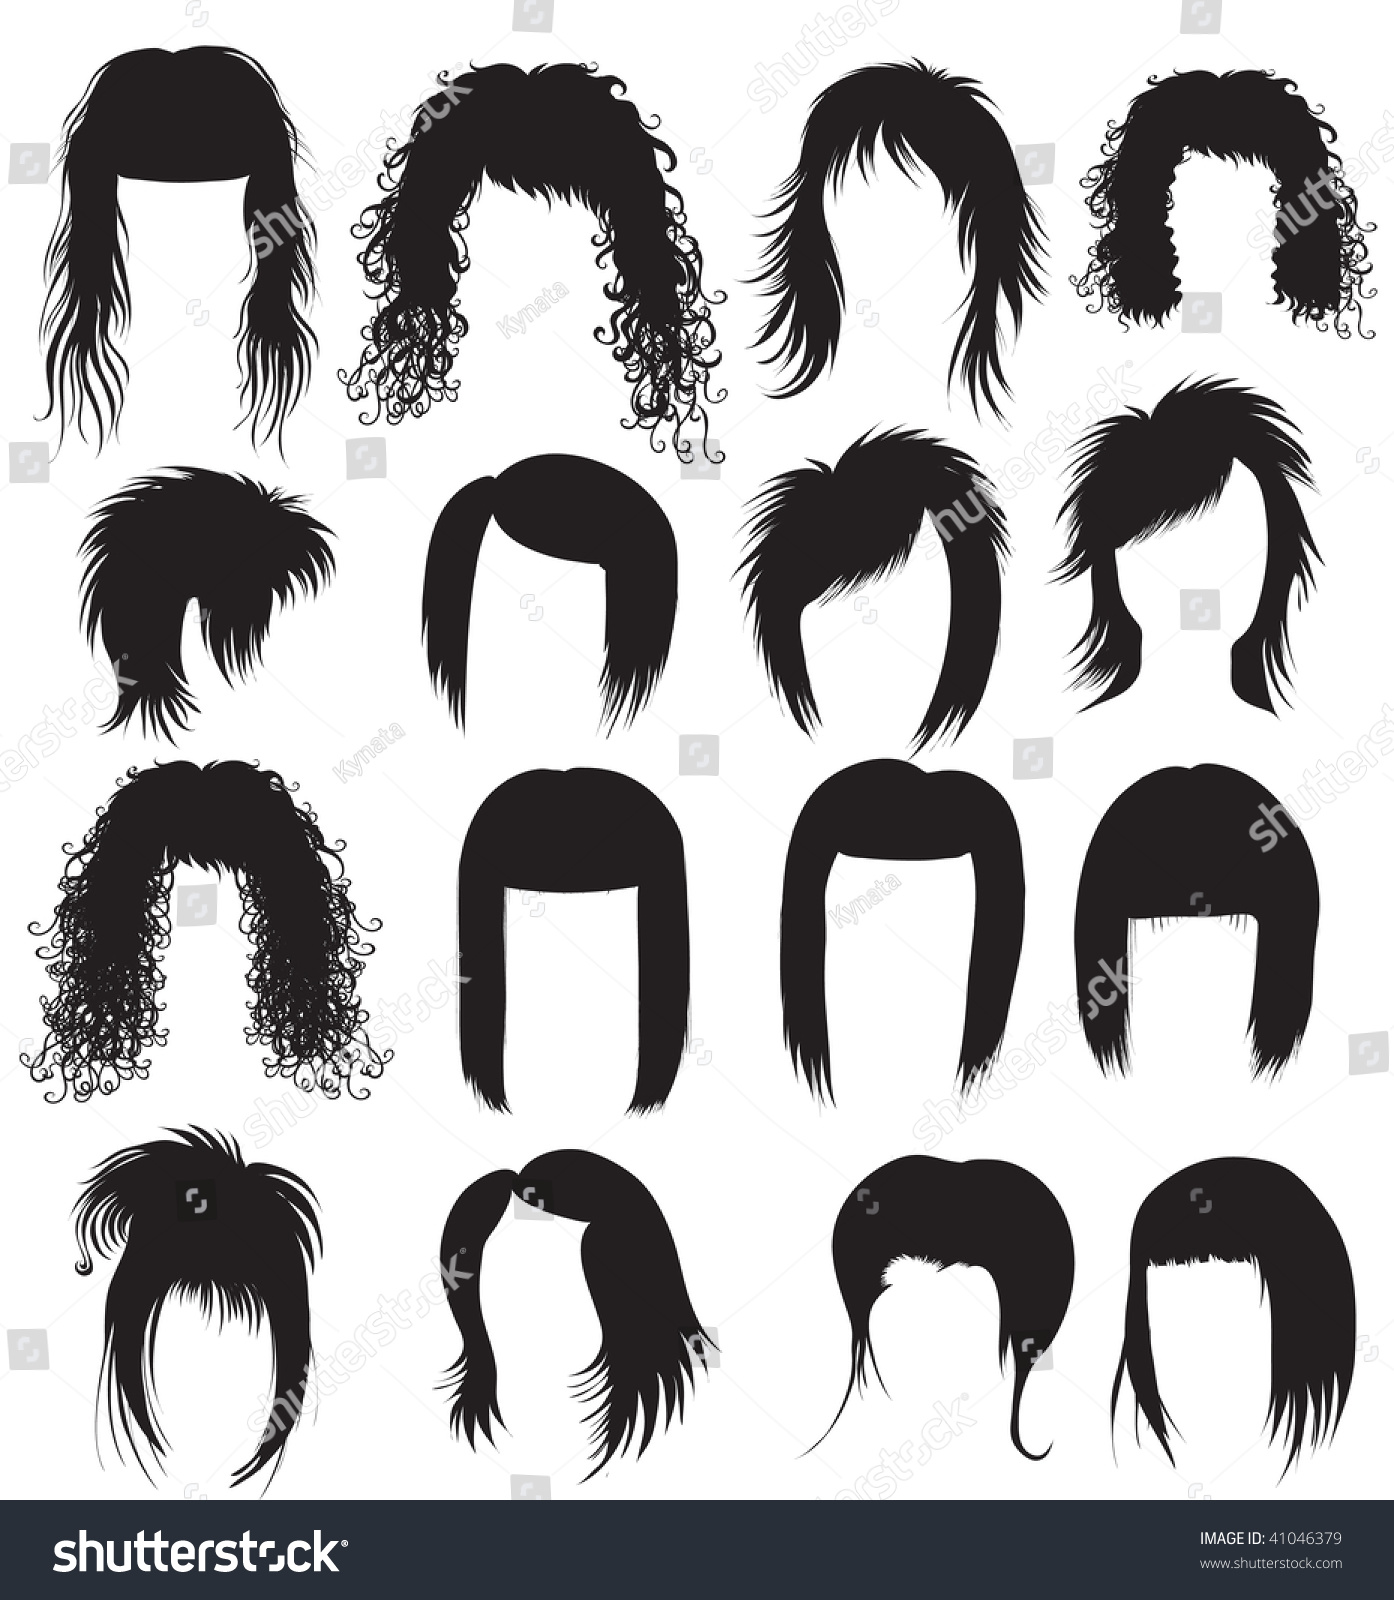 Raster Big Set Of Black Hair Styling For Woman Stock Photo 41046379 ...